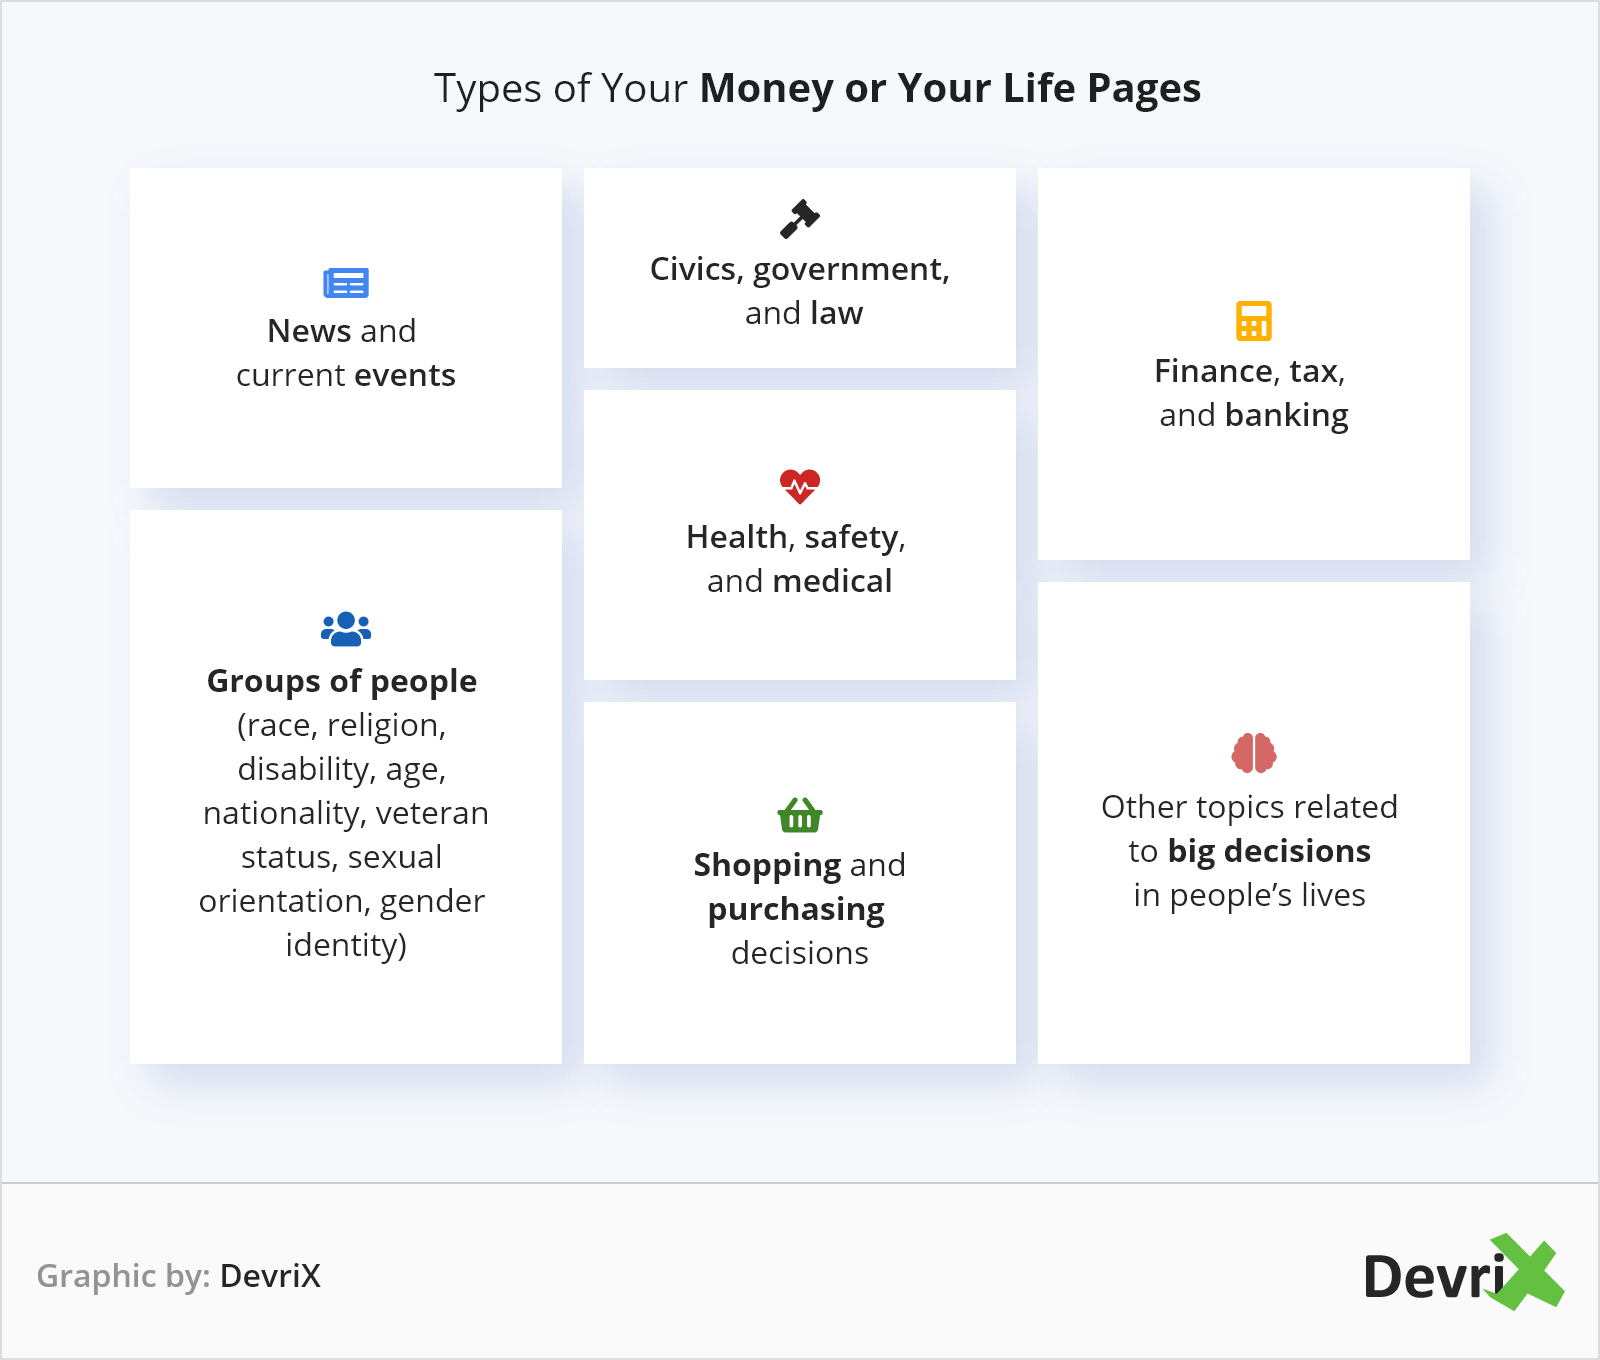 Types of Your Money or Your Life Pages